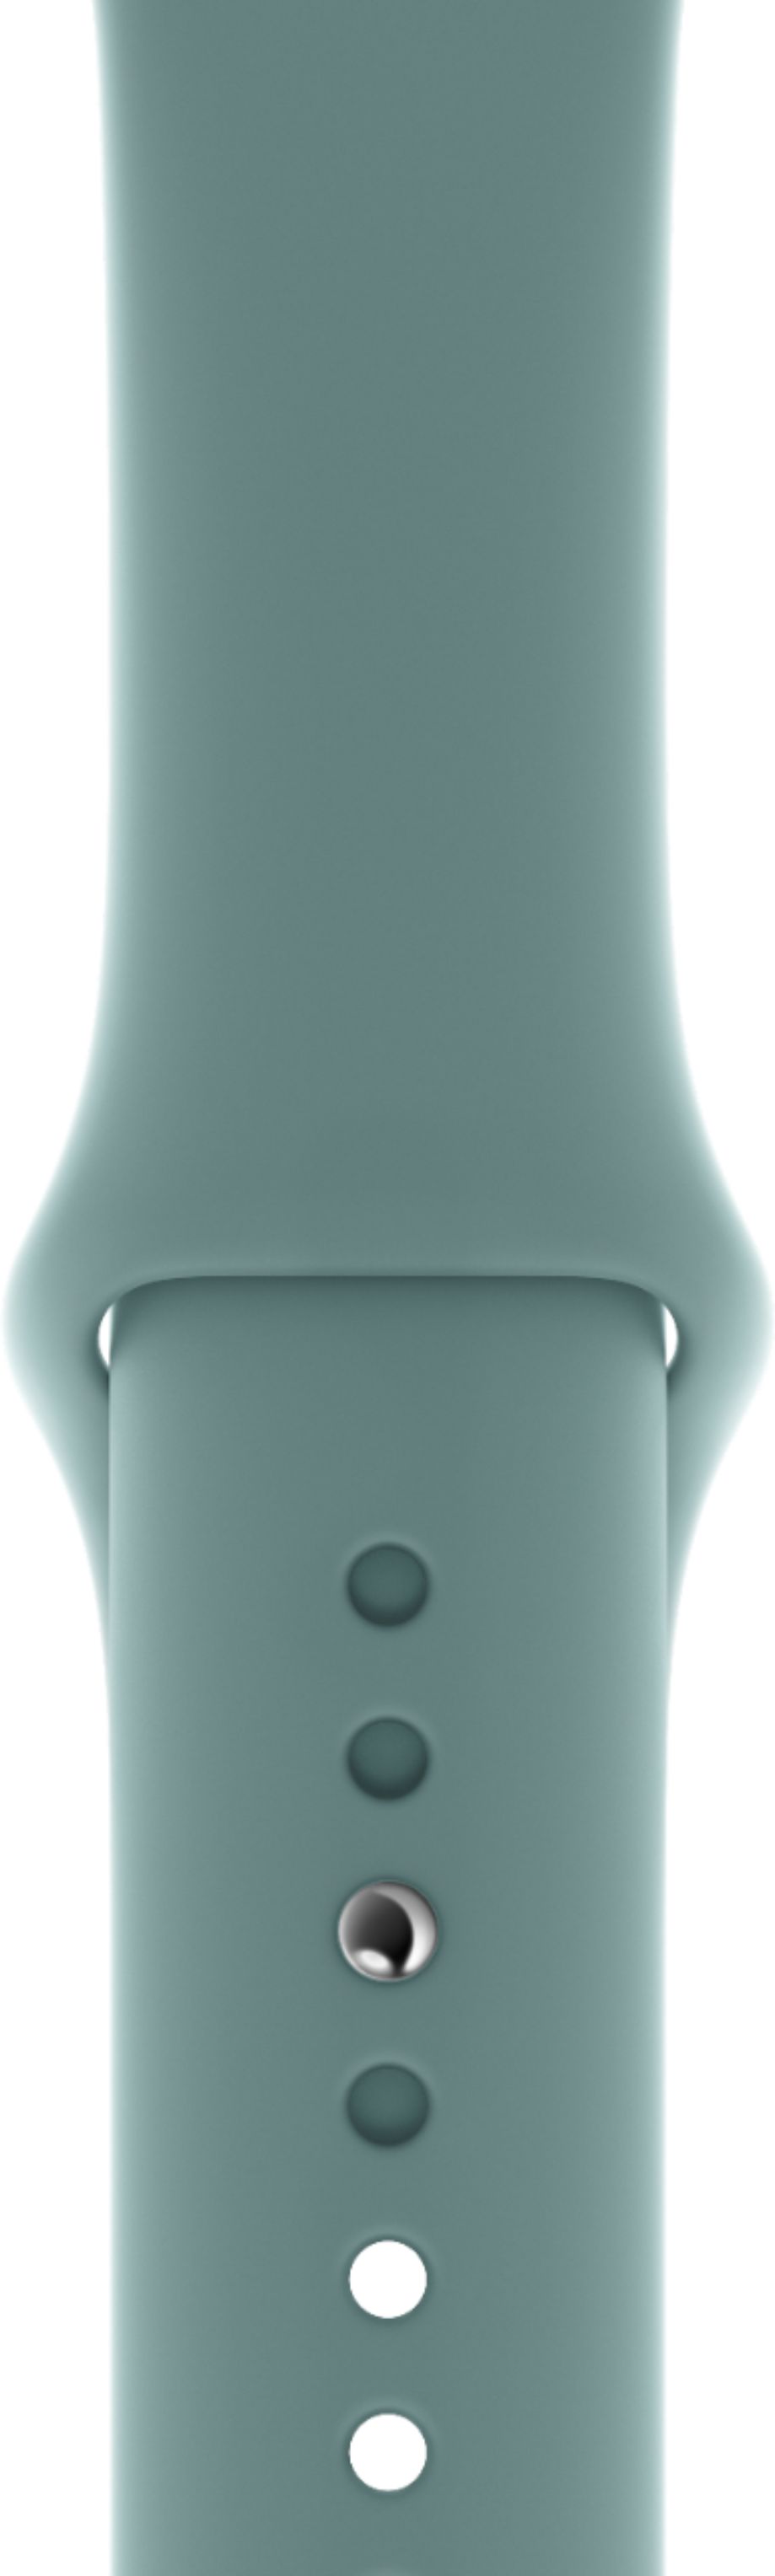 Sport Band for Apple Watch™ 44mm Cactus AW ACCY 2019 299 - Best Buy